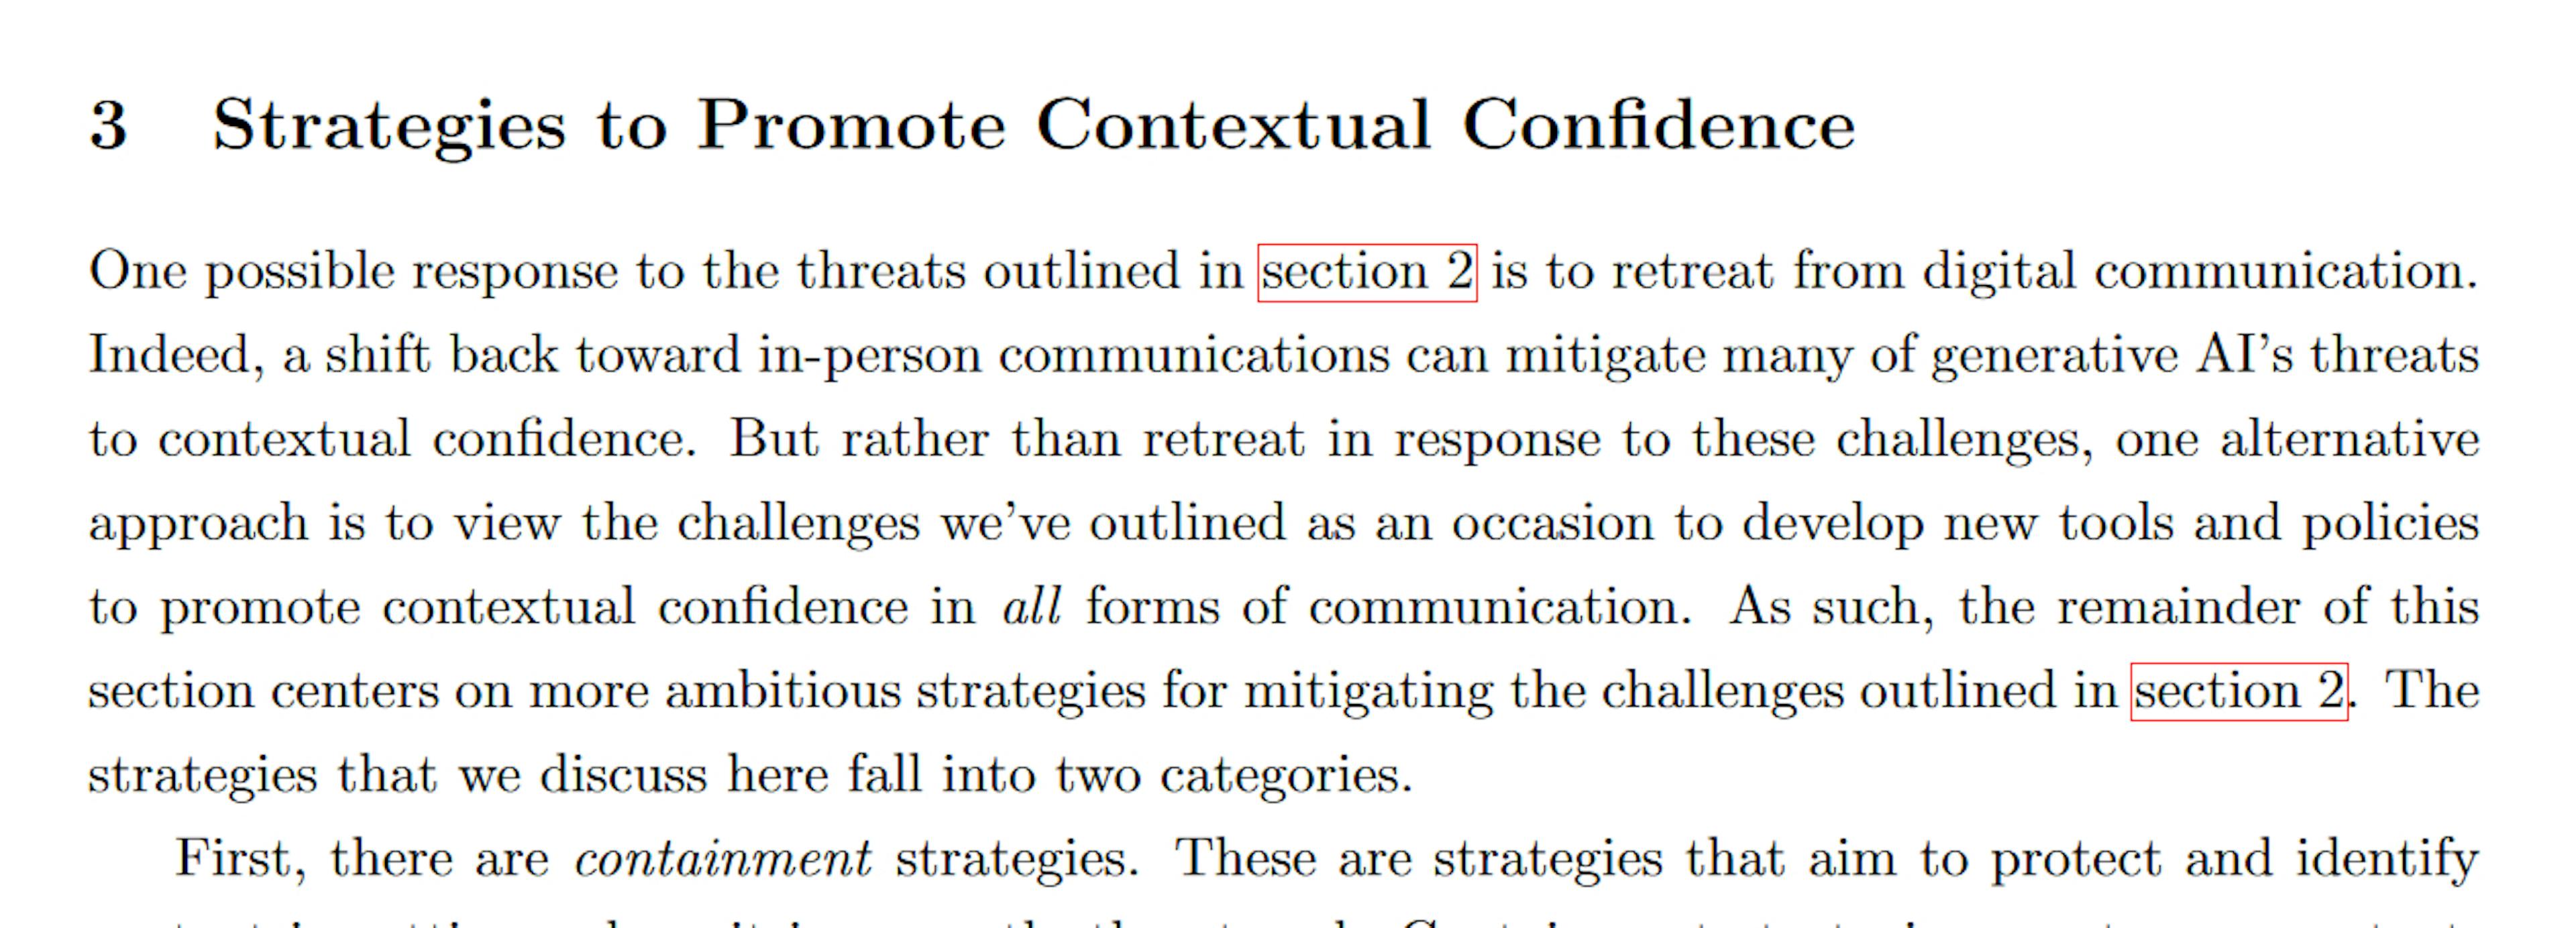 featured image - Generative AI and Contextual Confidence: Strategies to Promote Contextual Confidence